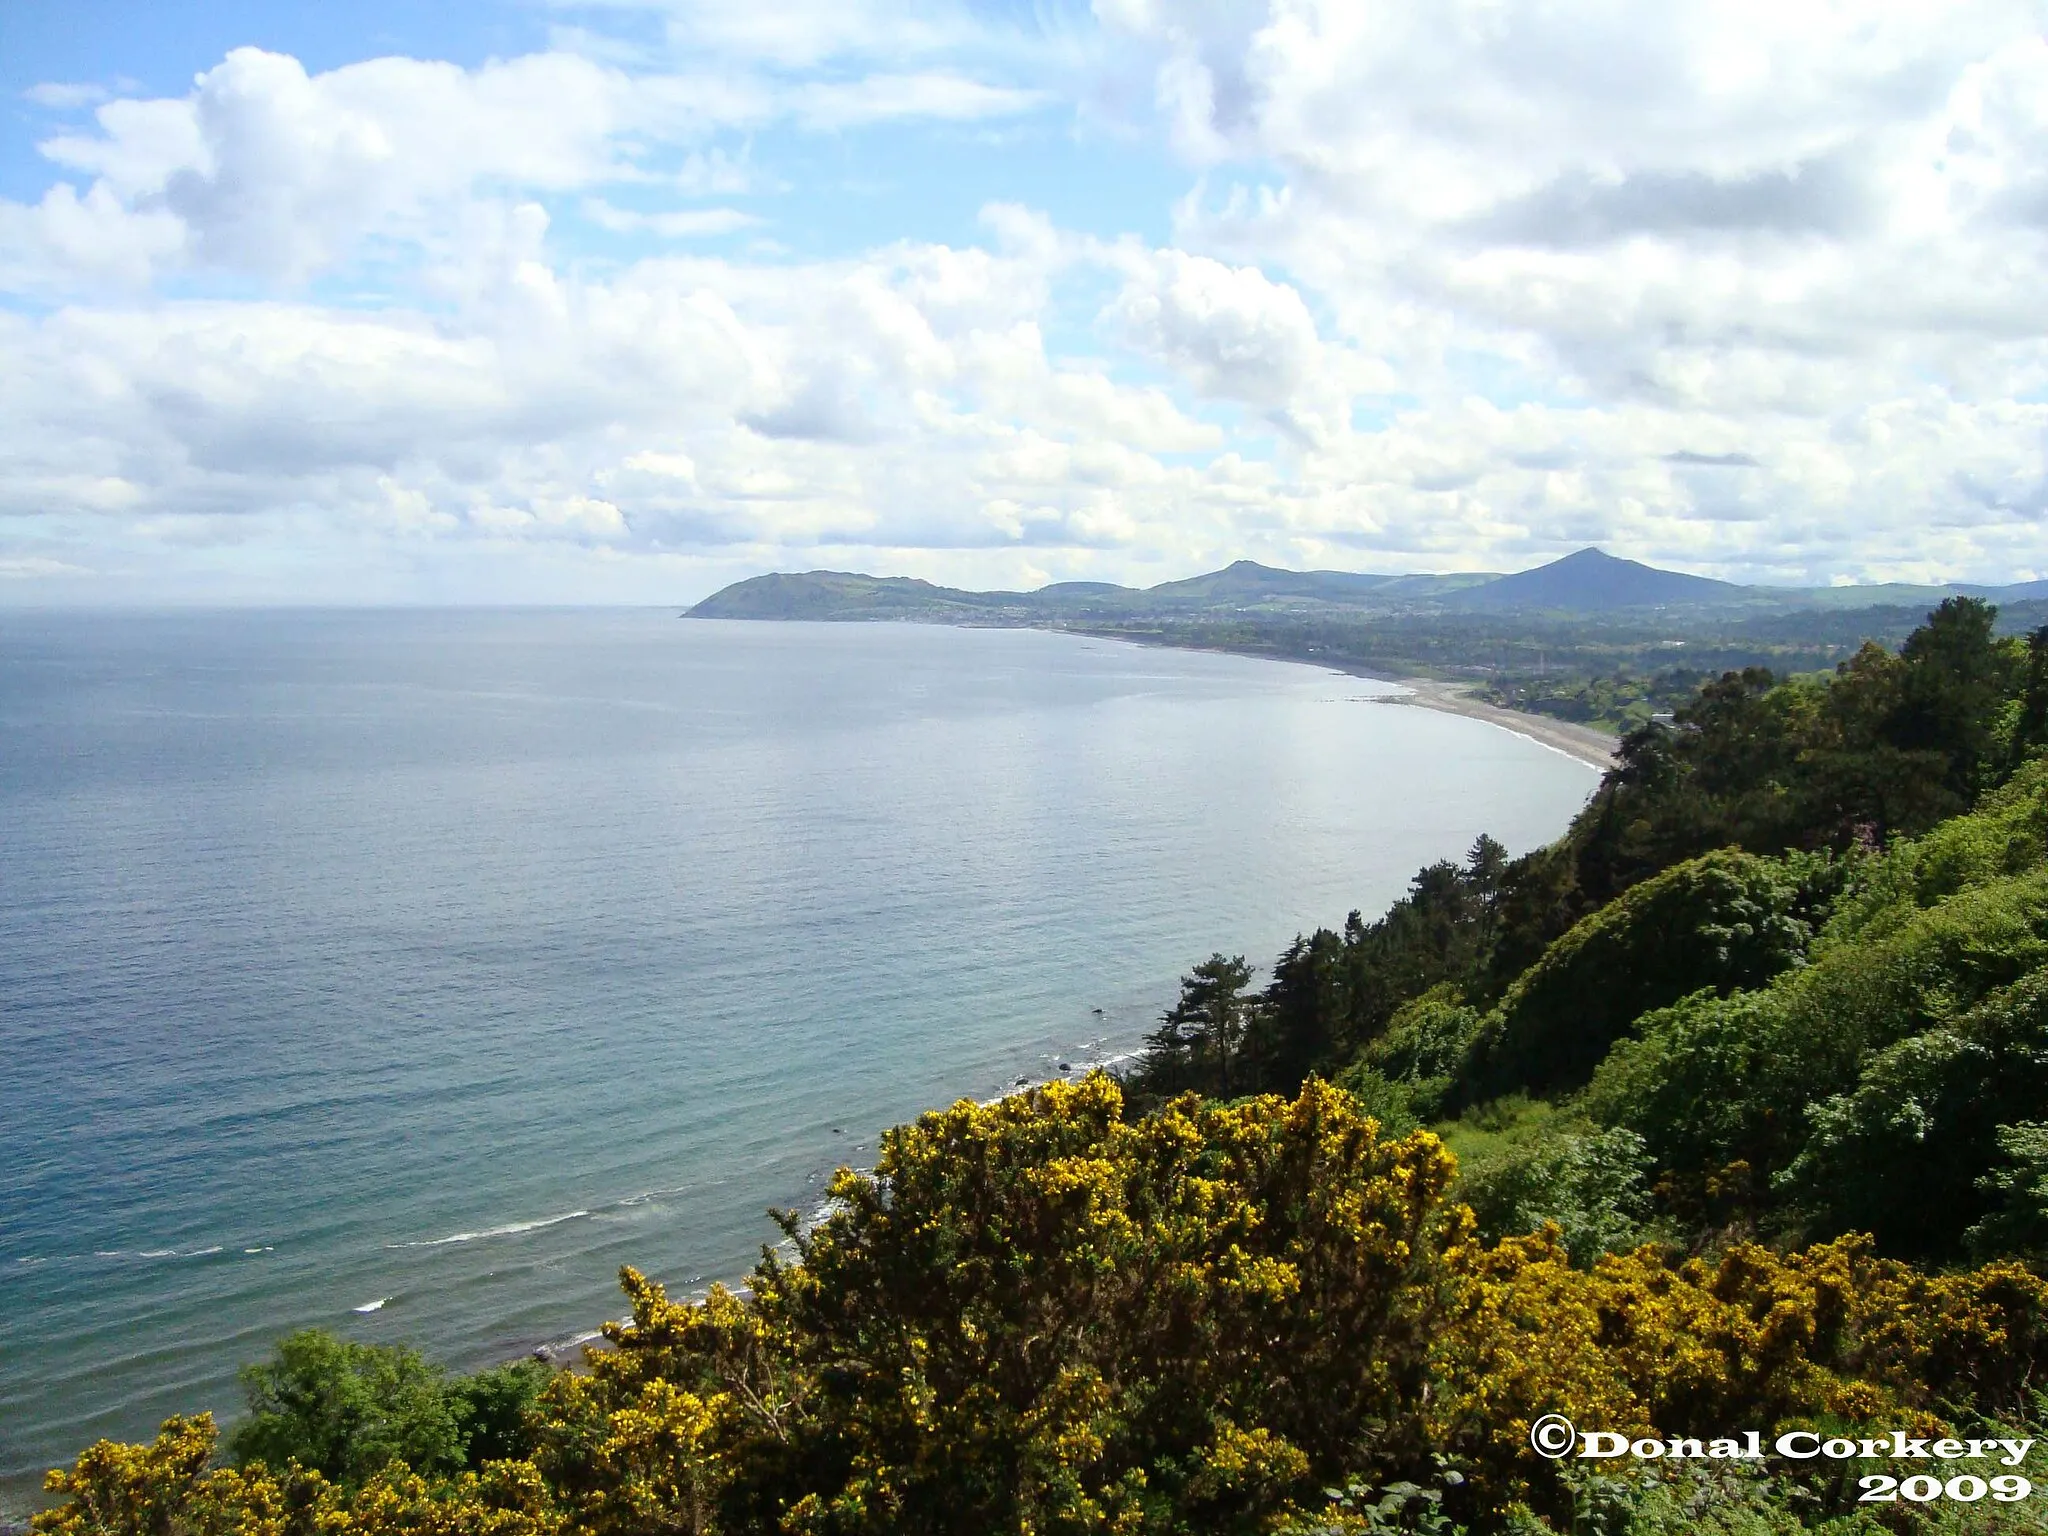 Photo showing: This is one of the many views of Killiney Hill